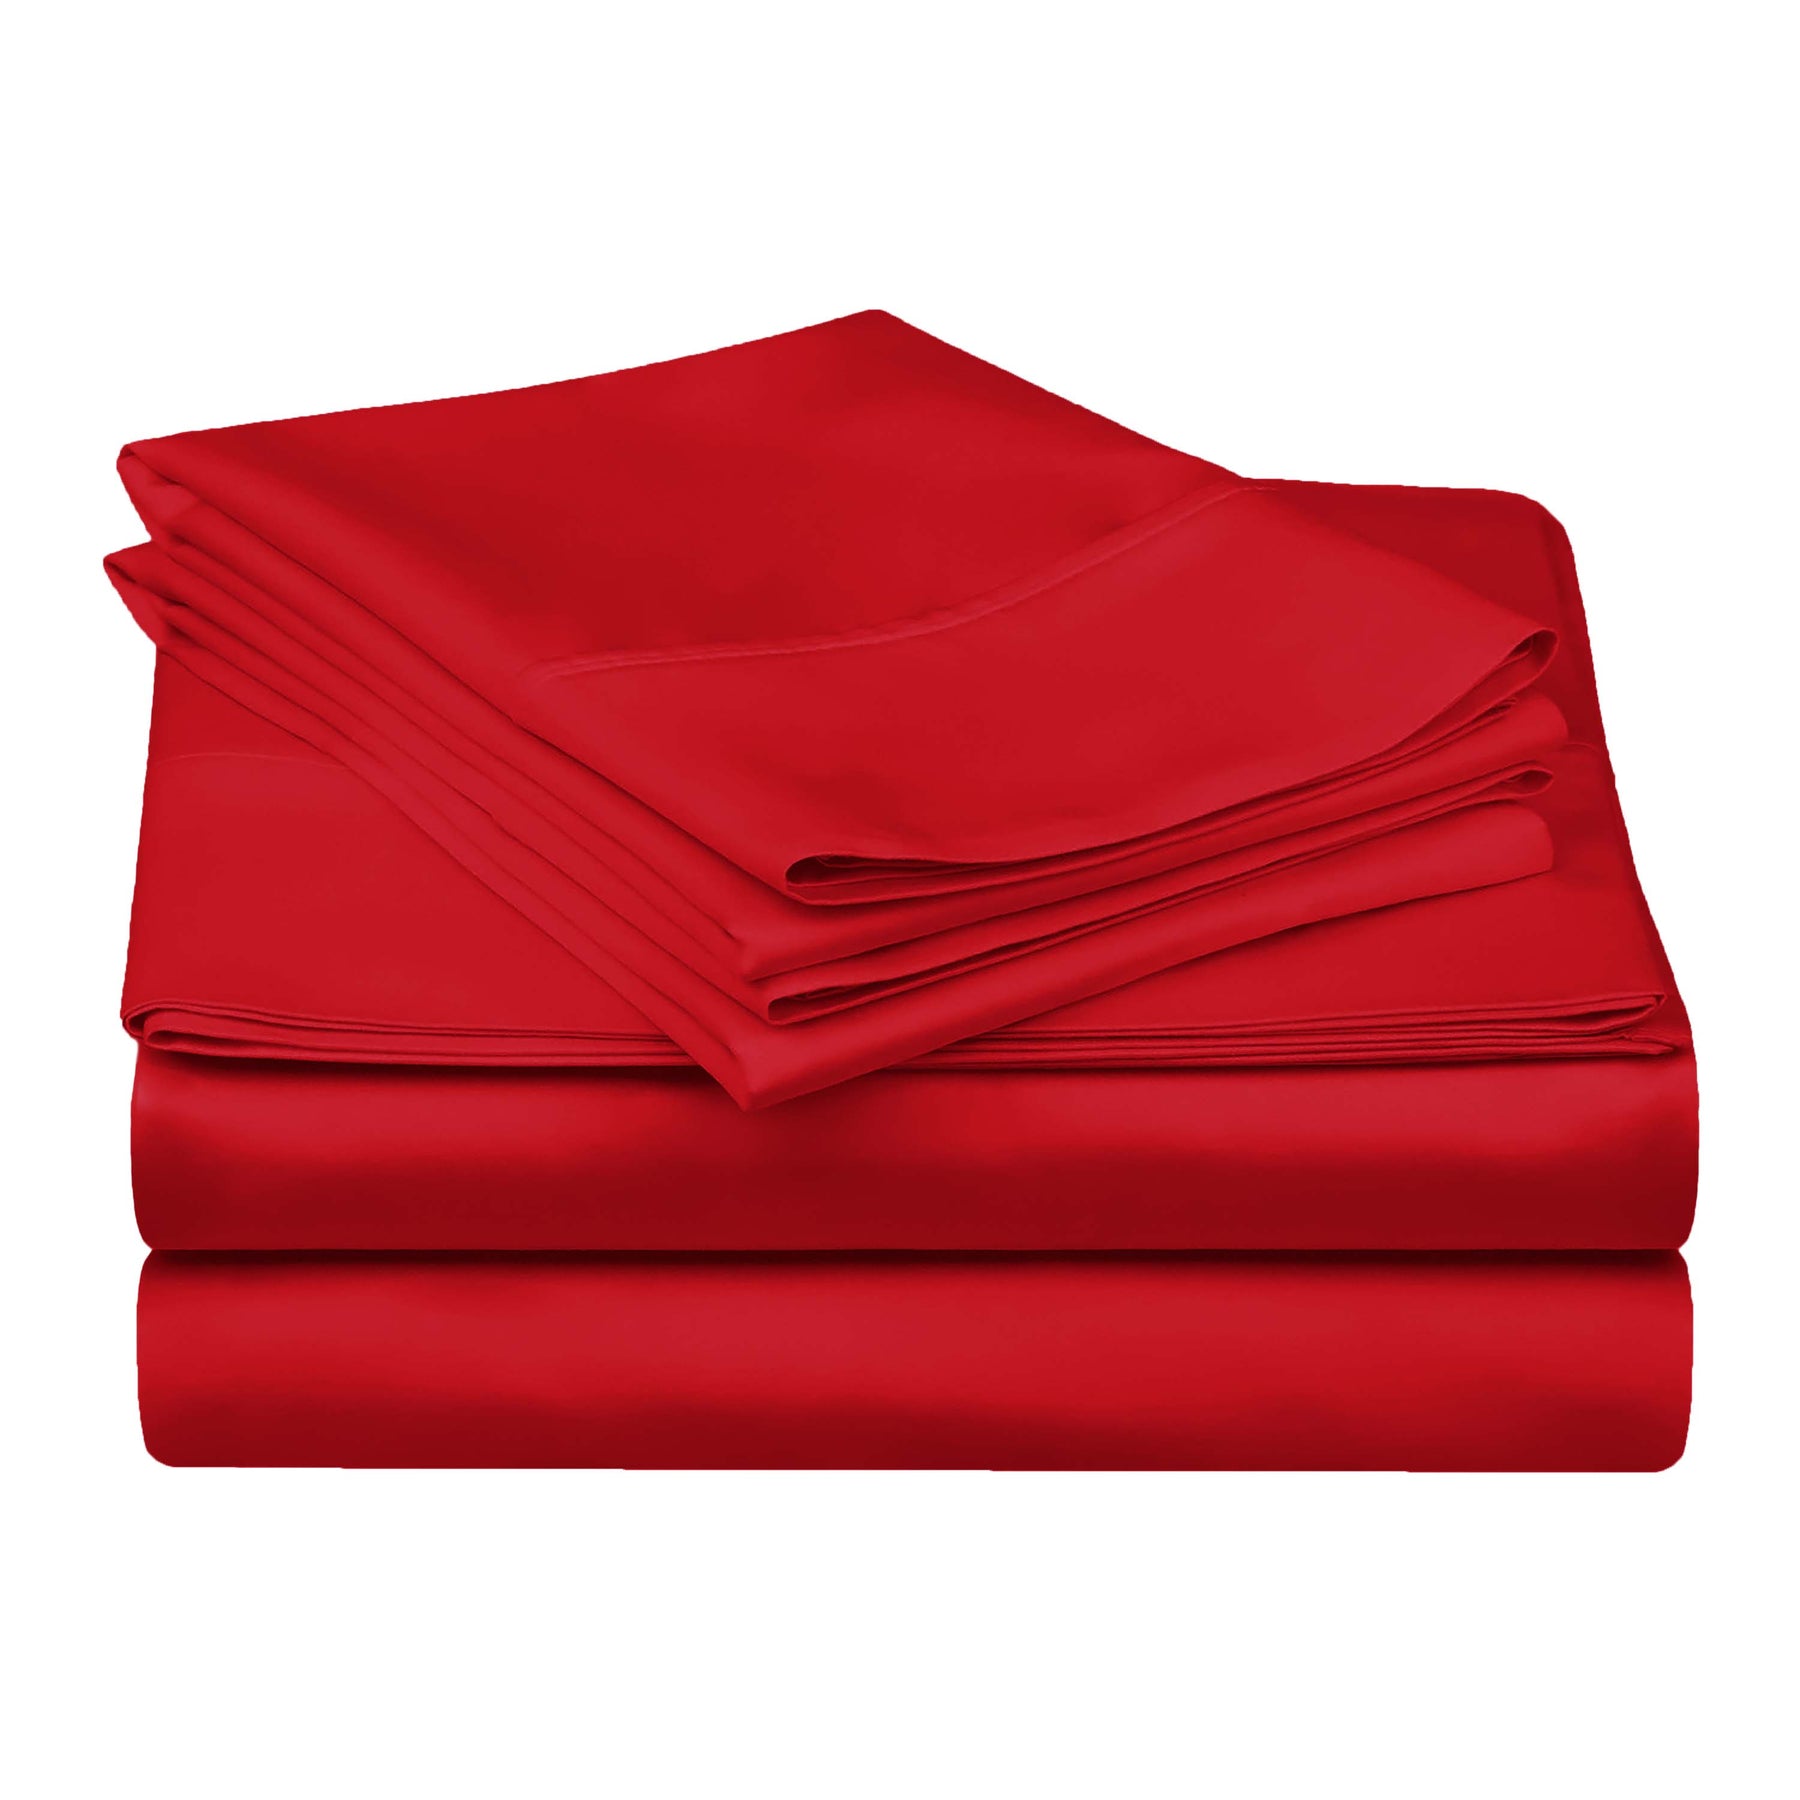 Egyptian Cotton 300 Thread Count Solid Deep Pocket Sheet Set - Red